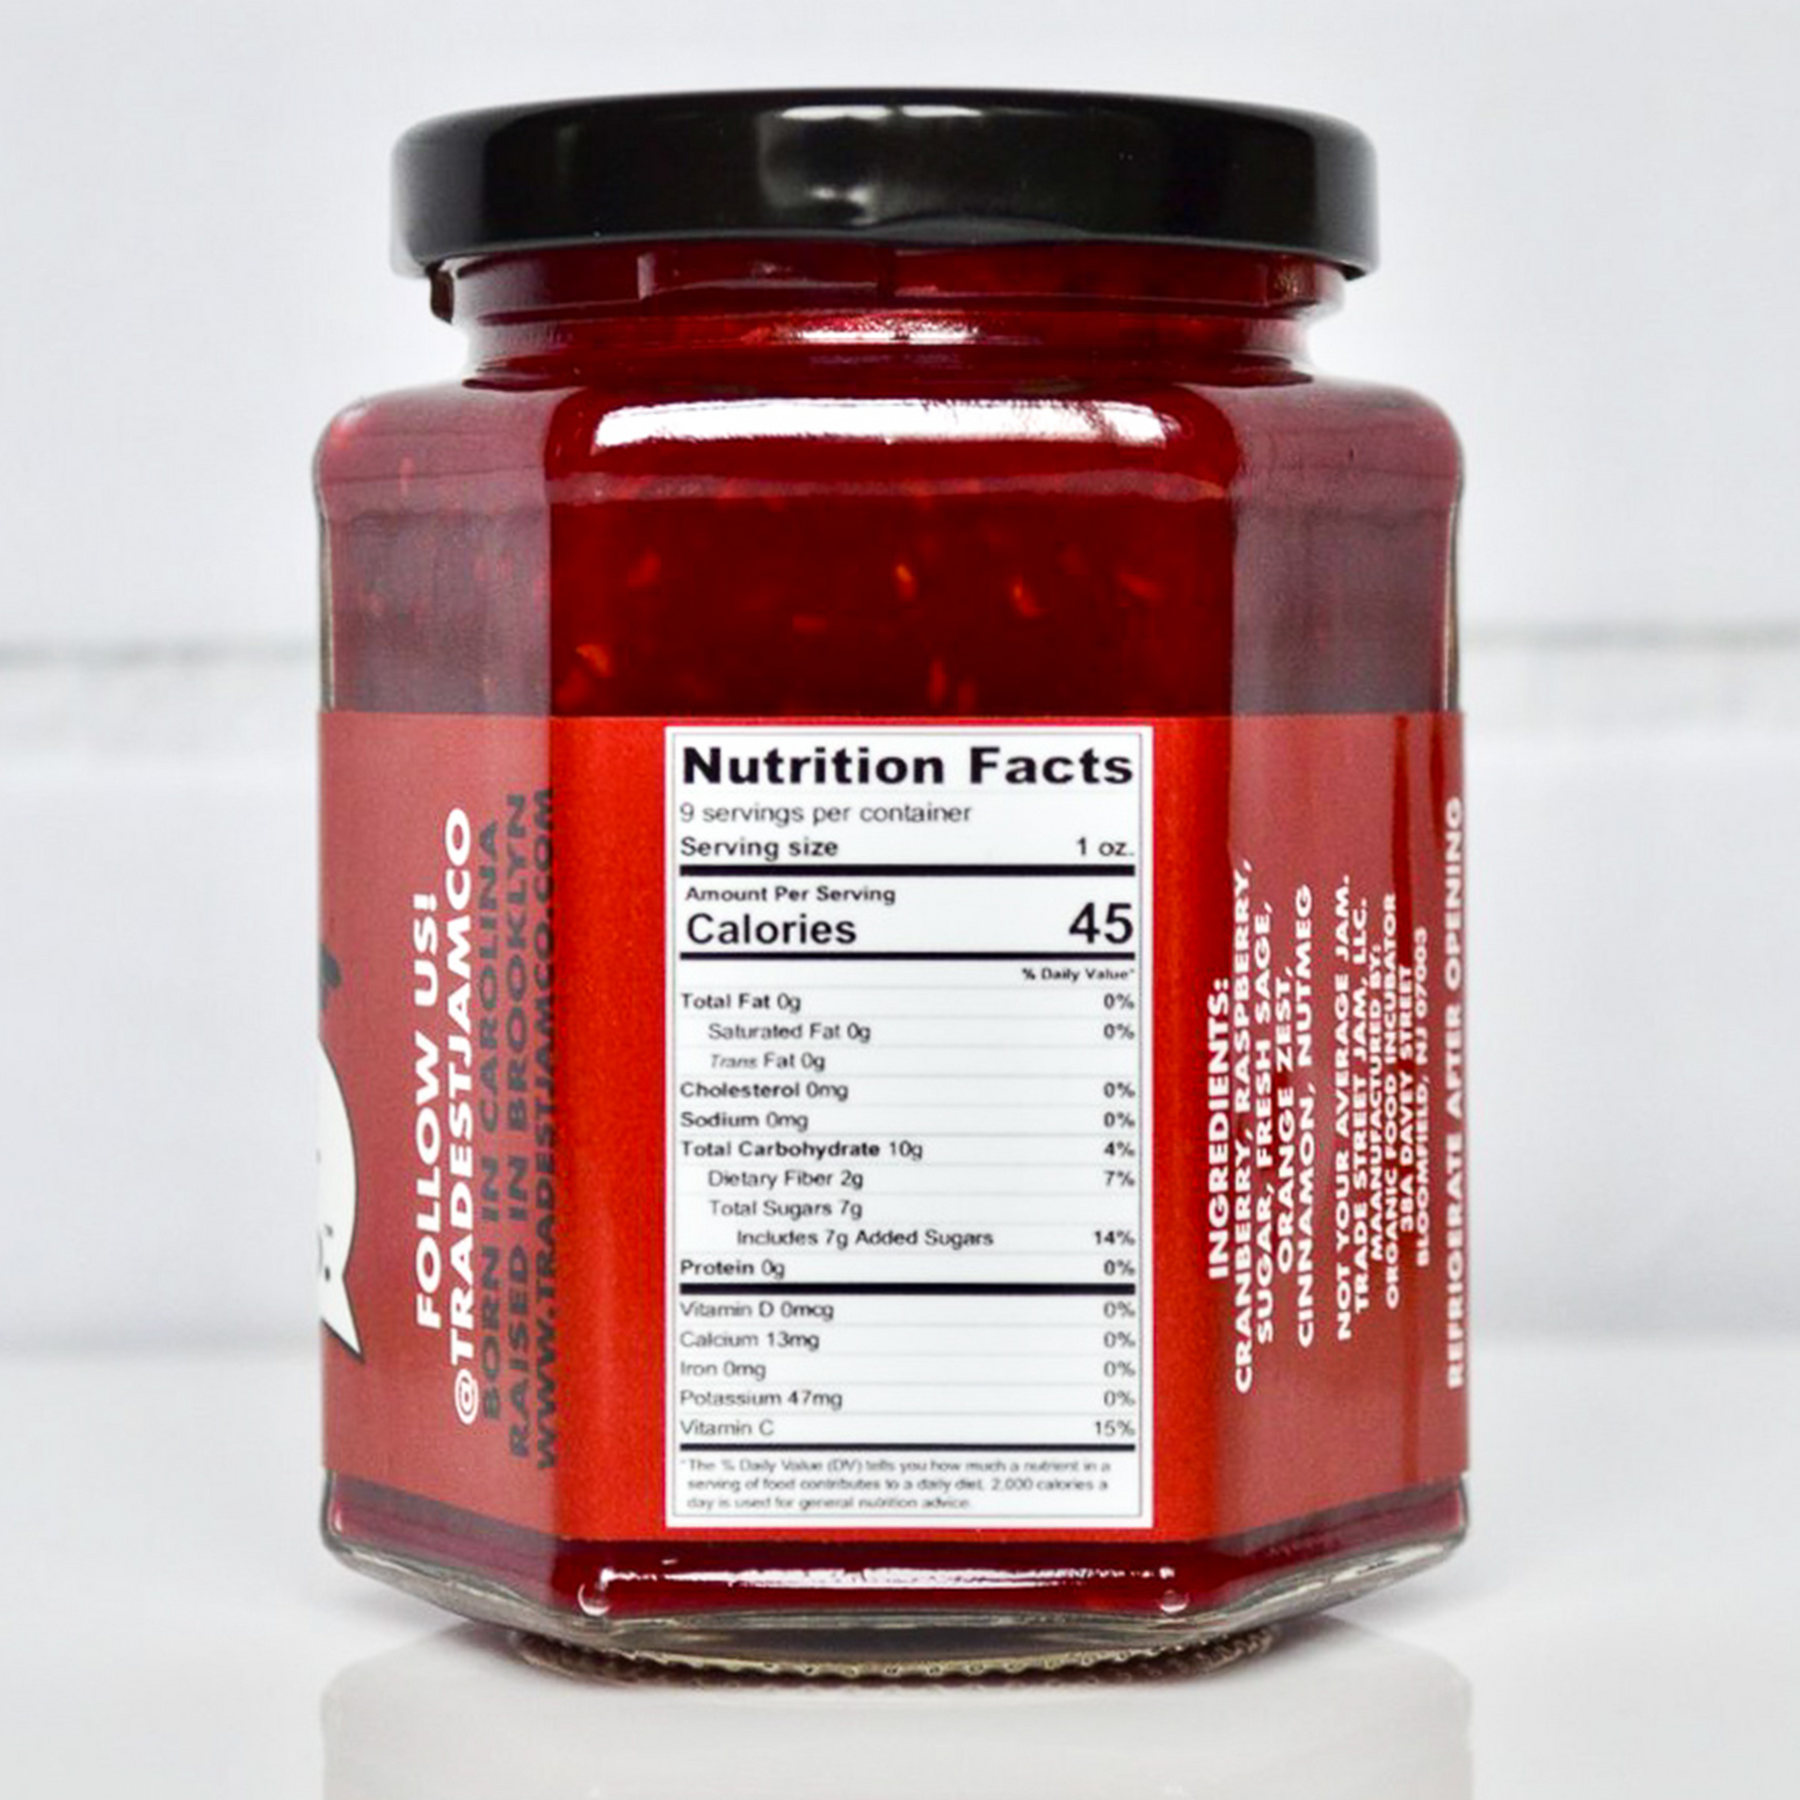 Limited Edition: Cranberry Raspberry Sage Jam - 2 Pack - The Shade Room Shop